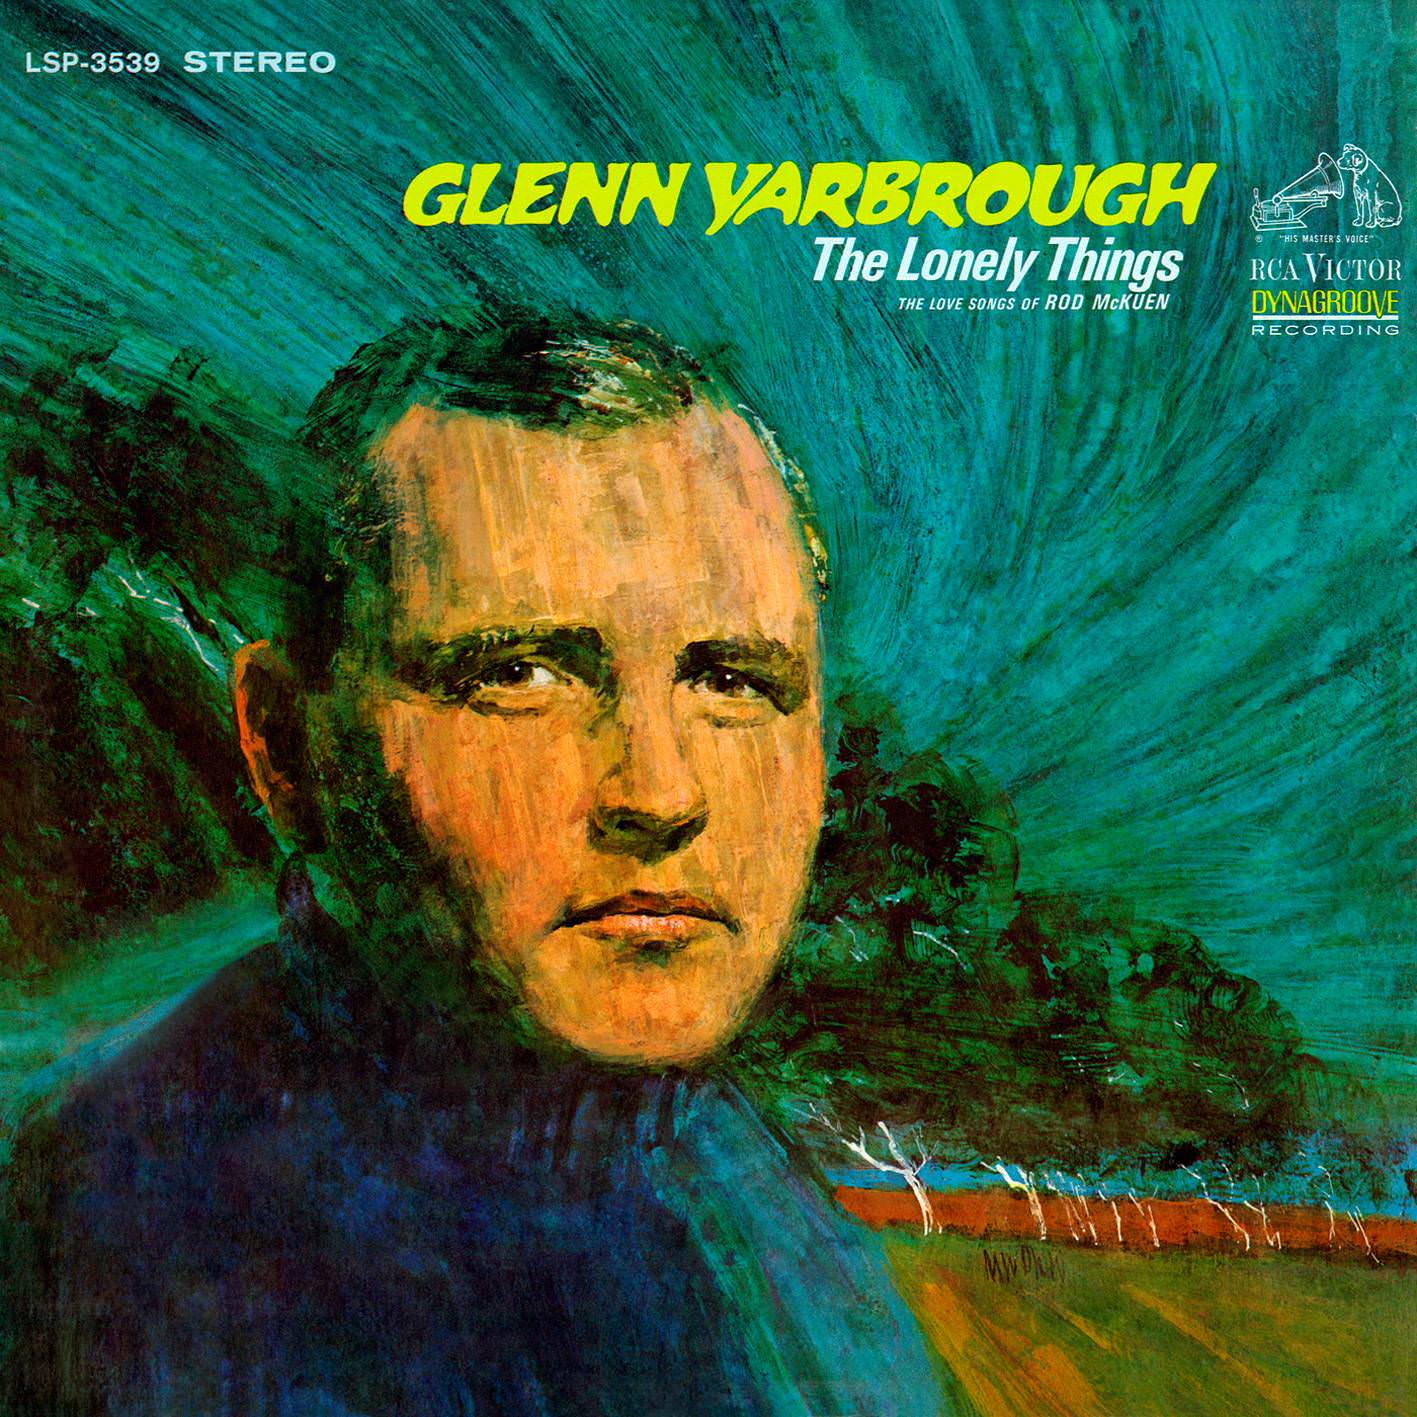 Glenn Yarbrough – The Lonely Things (1966/2017) [AcousticSounds FLAC 24bit/192kHz]